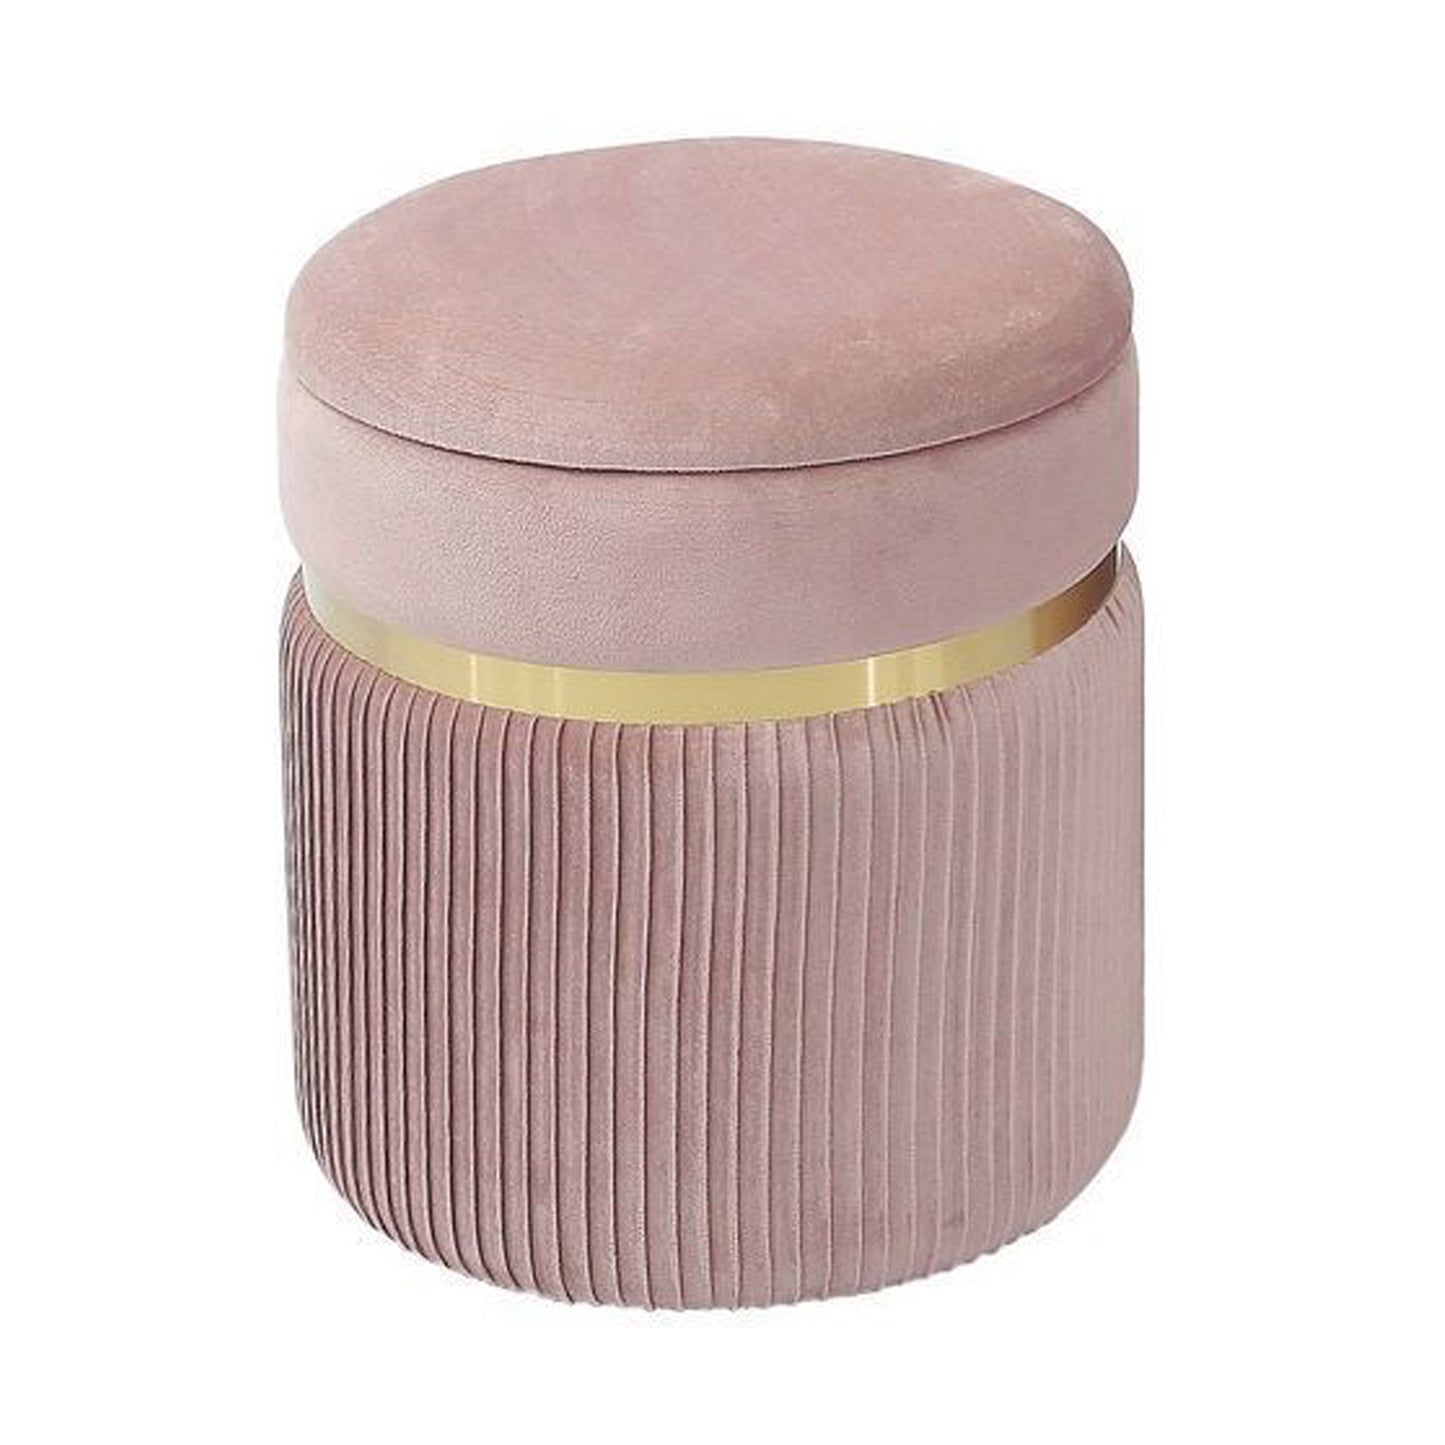 Sion Velvet Pouf with container